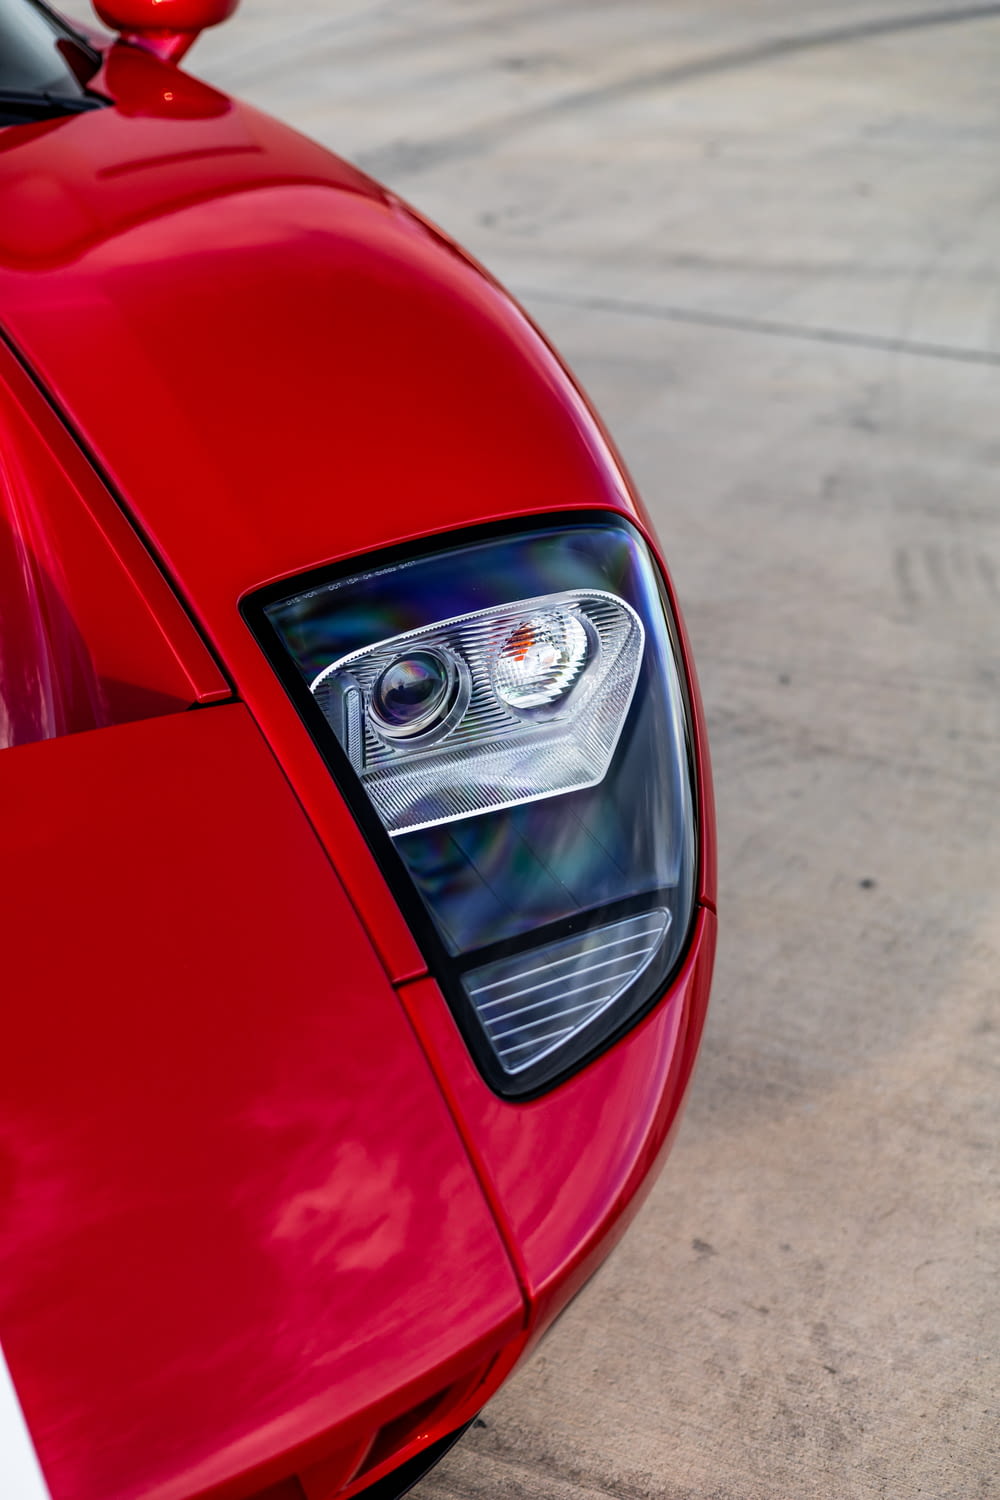 a close up of a red sports car headlight